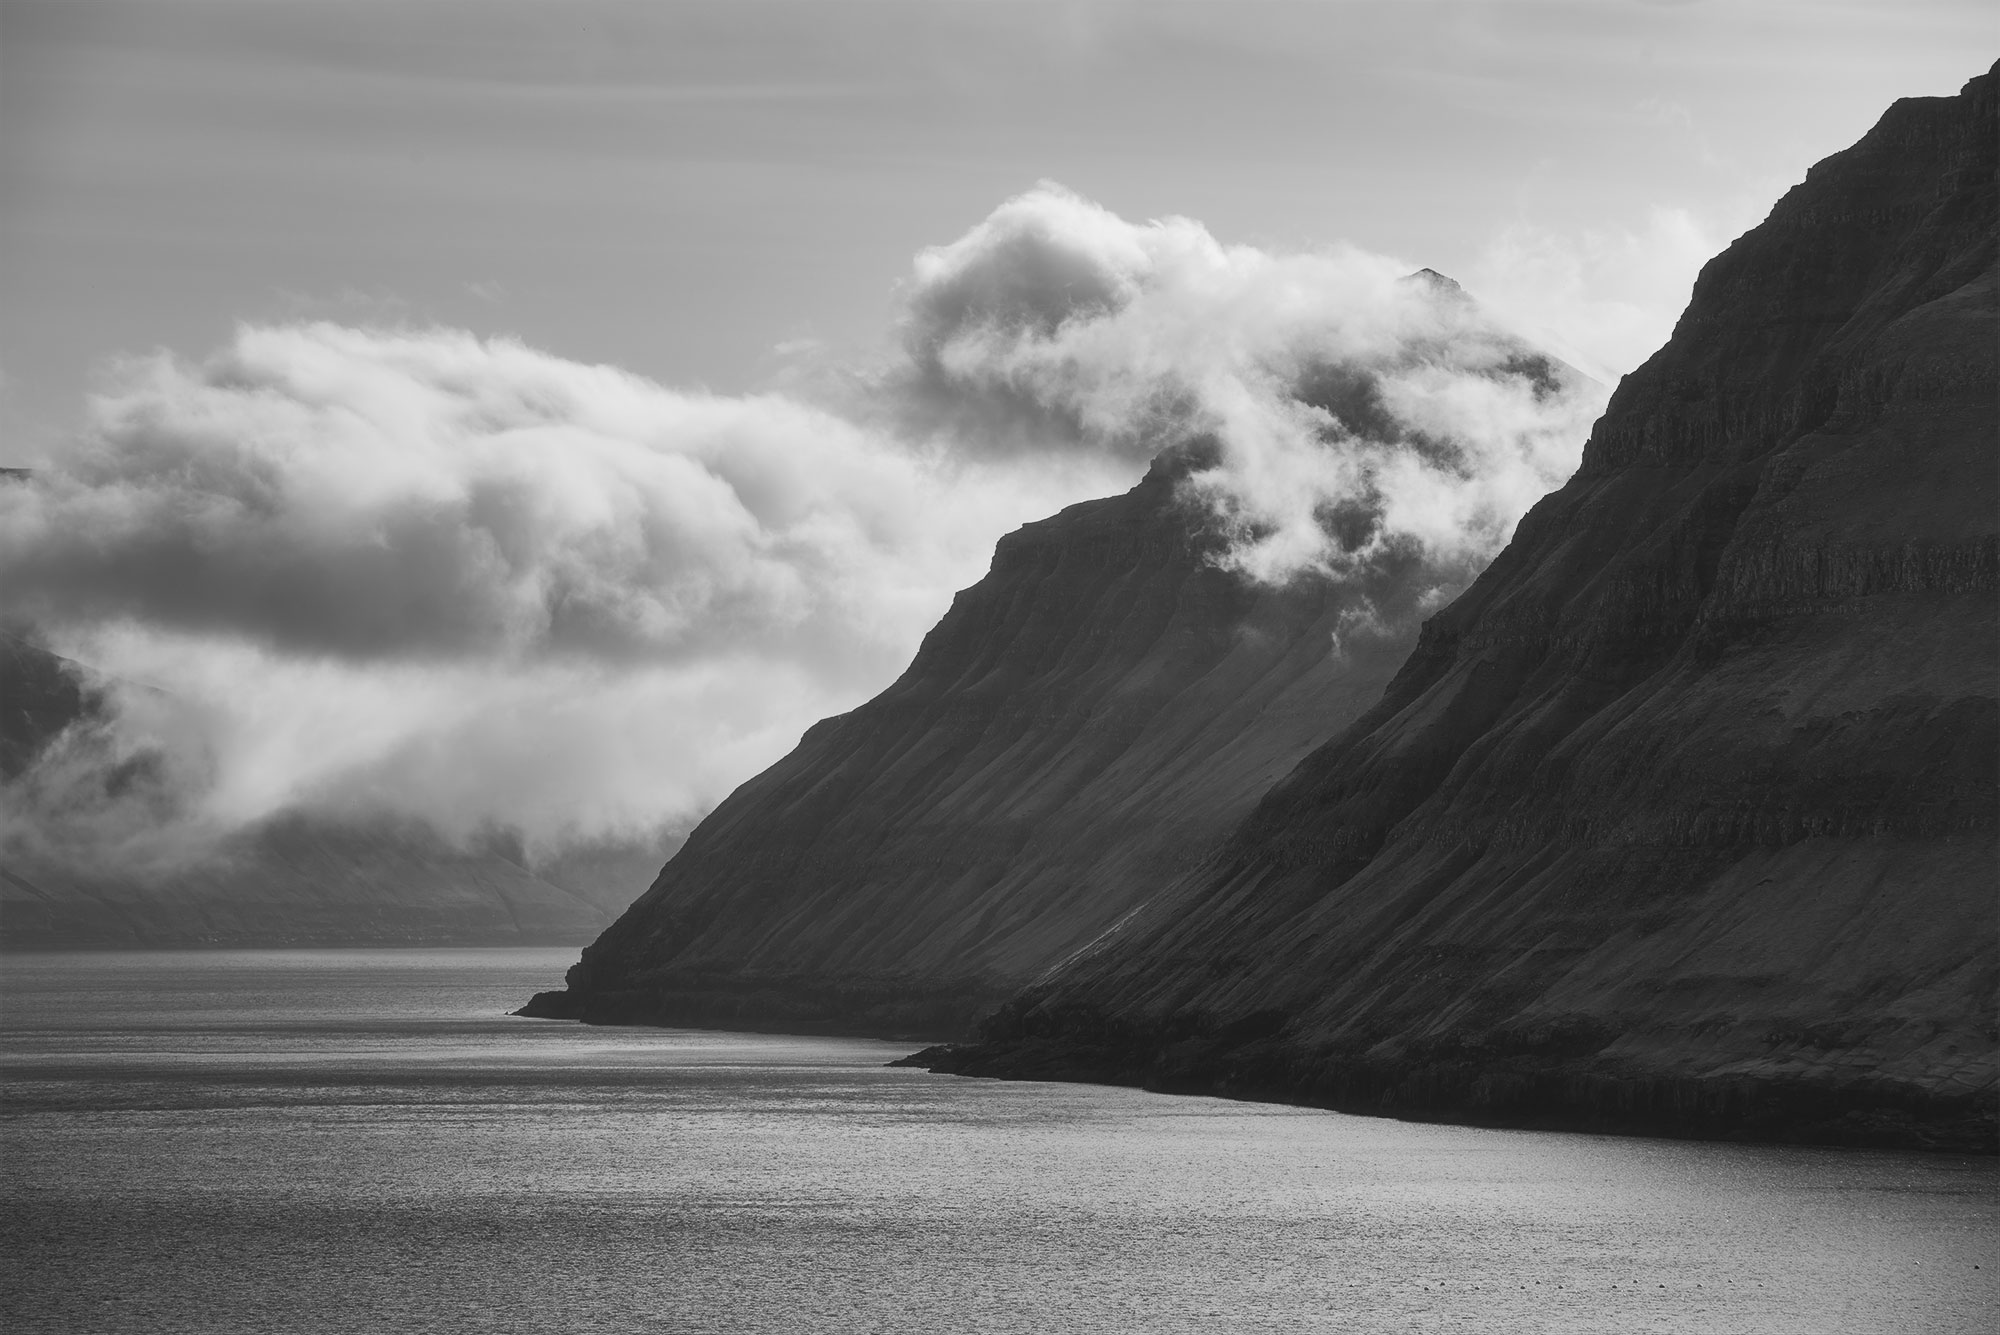 Explore the dramatic landscapes of the Faroe Islands with this captivating black and white photograph captured by Swiss landscape photographer Jennifer Esseiva and her Nikon D810. Behold the rugged beauty of Eysturoy Island as a cloud-covered mountain rises majestically into the sky. This striking image captures the raw, untamed essence of Faroese scenery, inviting viewers to immerse themselves in its timeless allure. Experience the power and majesty of nature preserved in black and white as you delve into this mesmerizing landscape photograph. Discover the unique beauty of the Faroe Islands through Jennifer Esseiva's lens, where every frame tells a story of nature's grandeur.